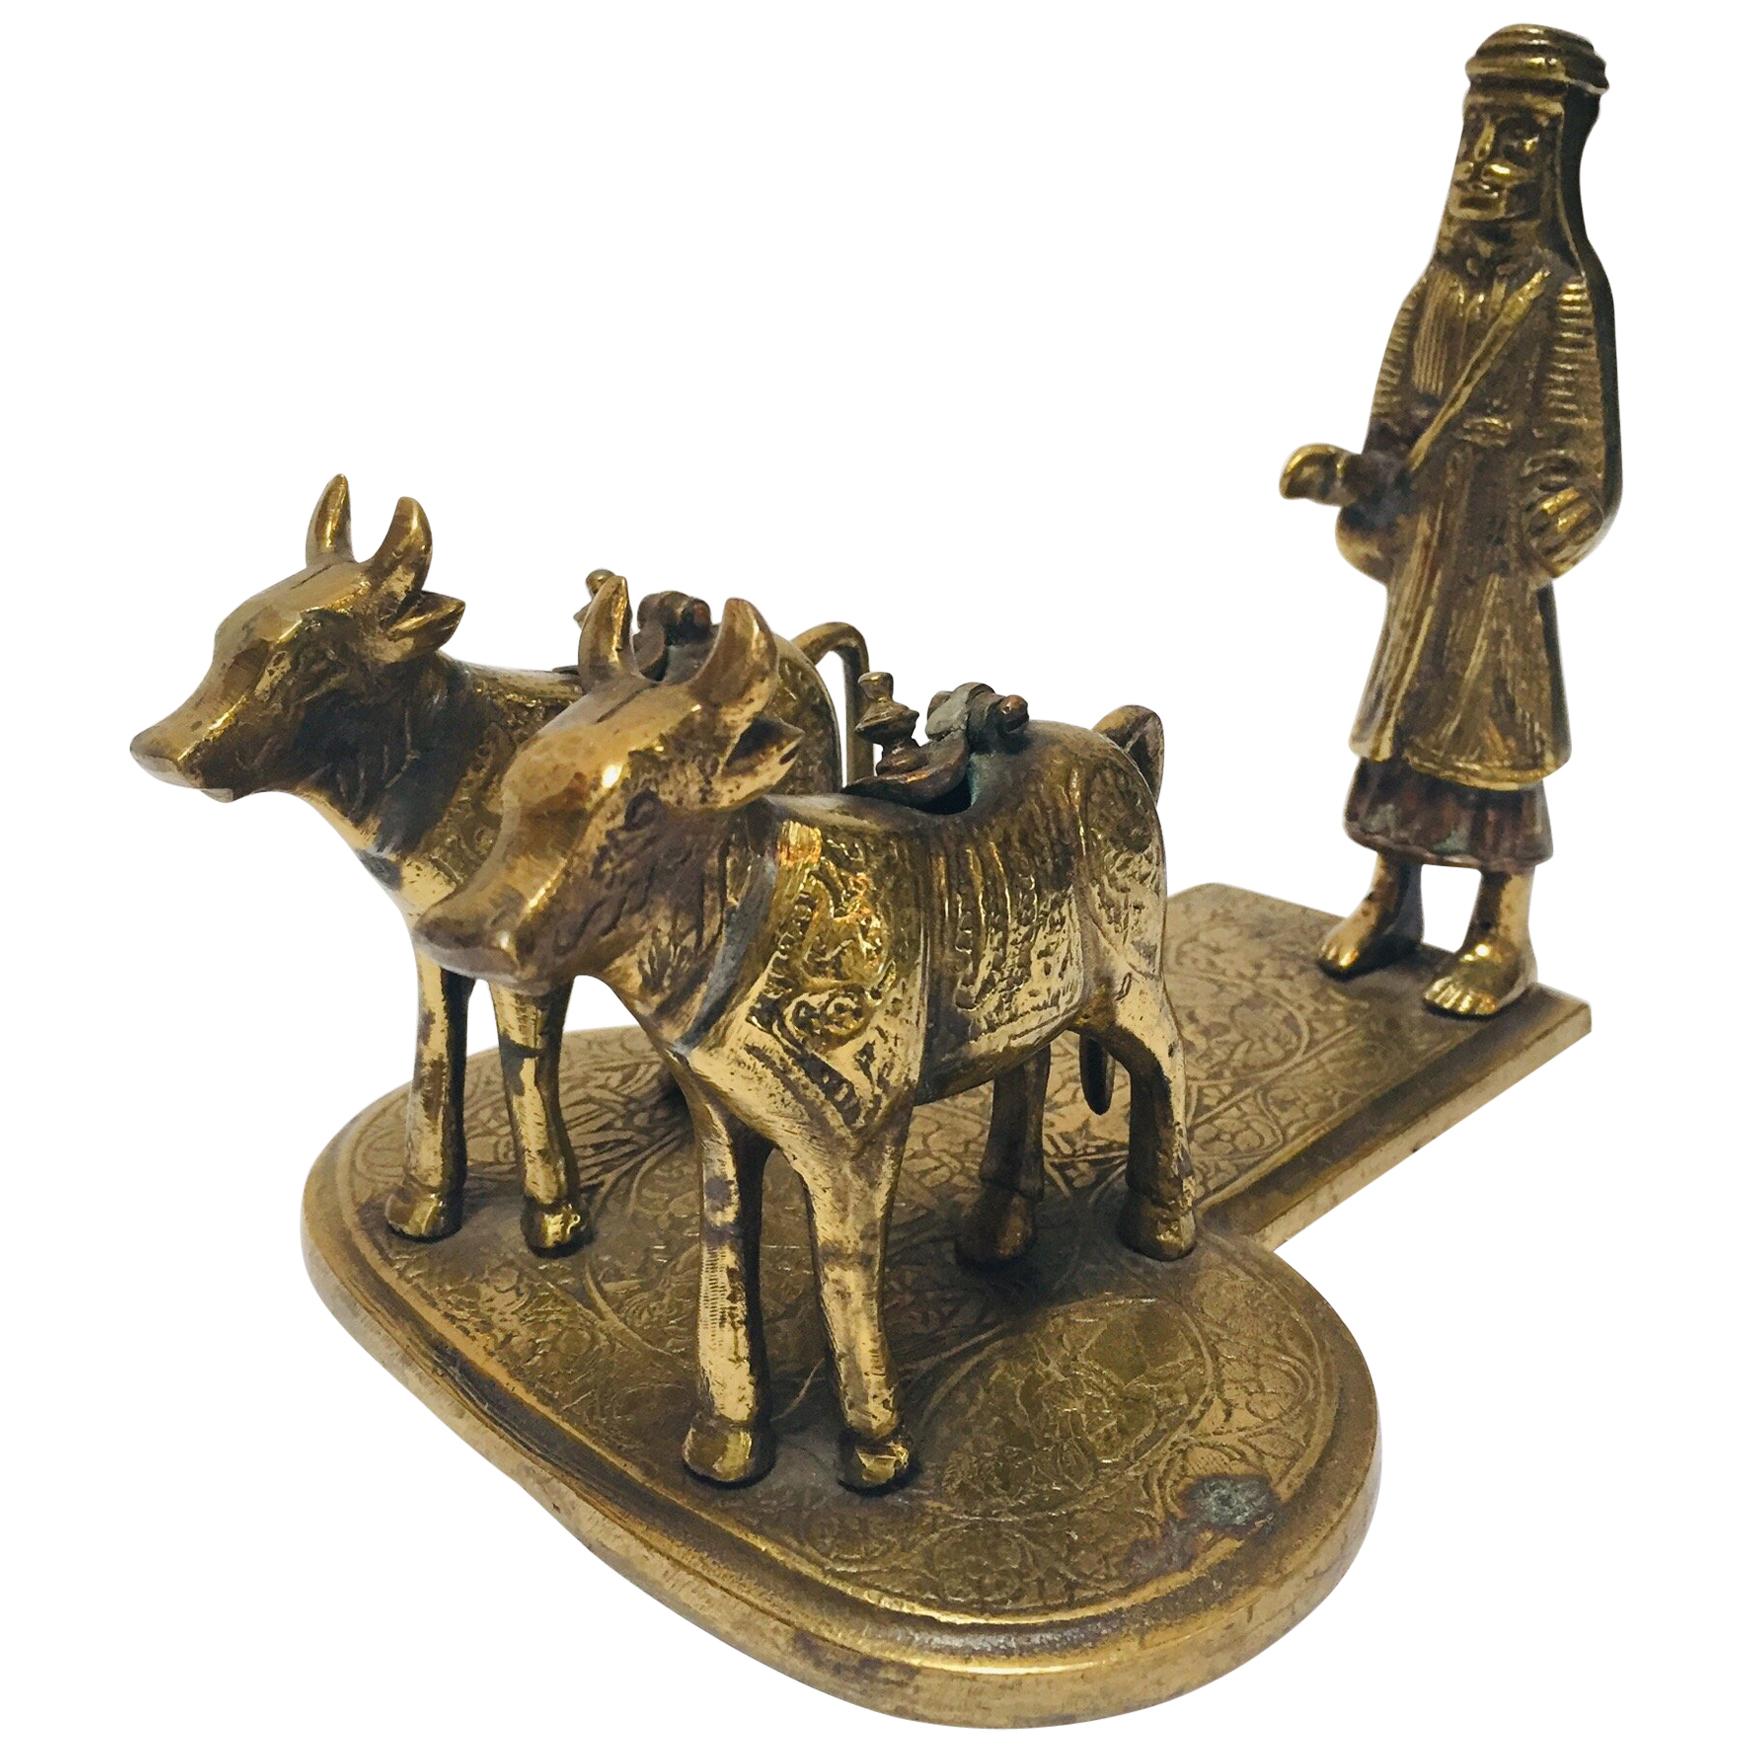 Brass Hindu Temple Oil Lamps Figures a Two Cows and Holly Man Standing